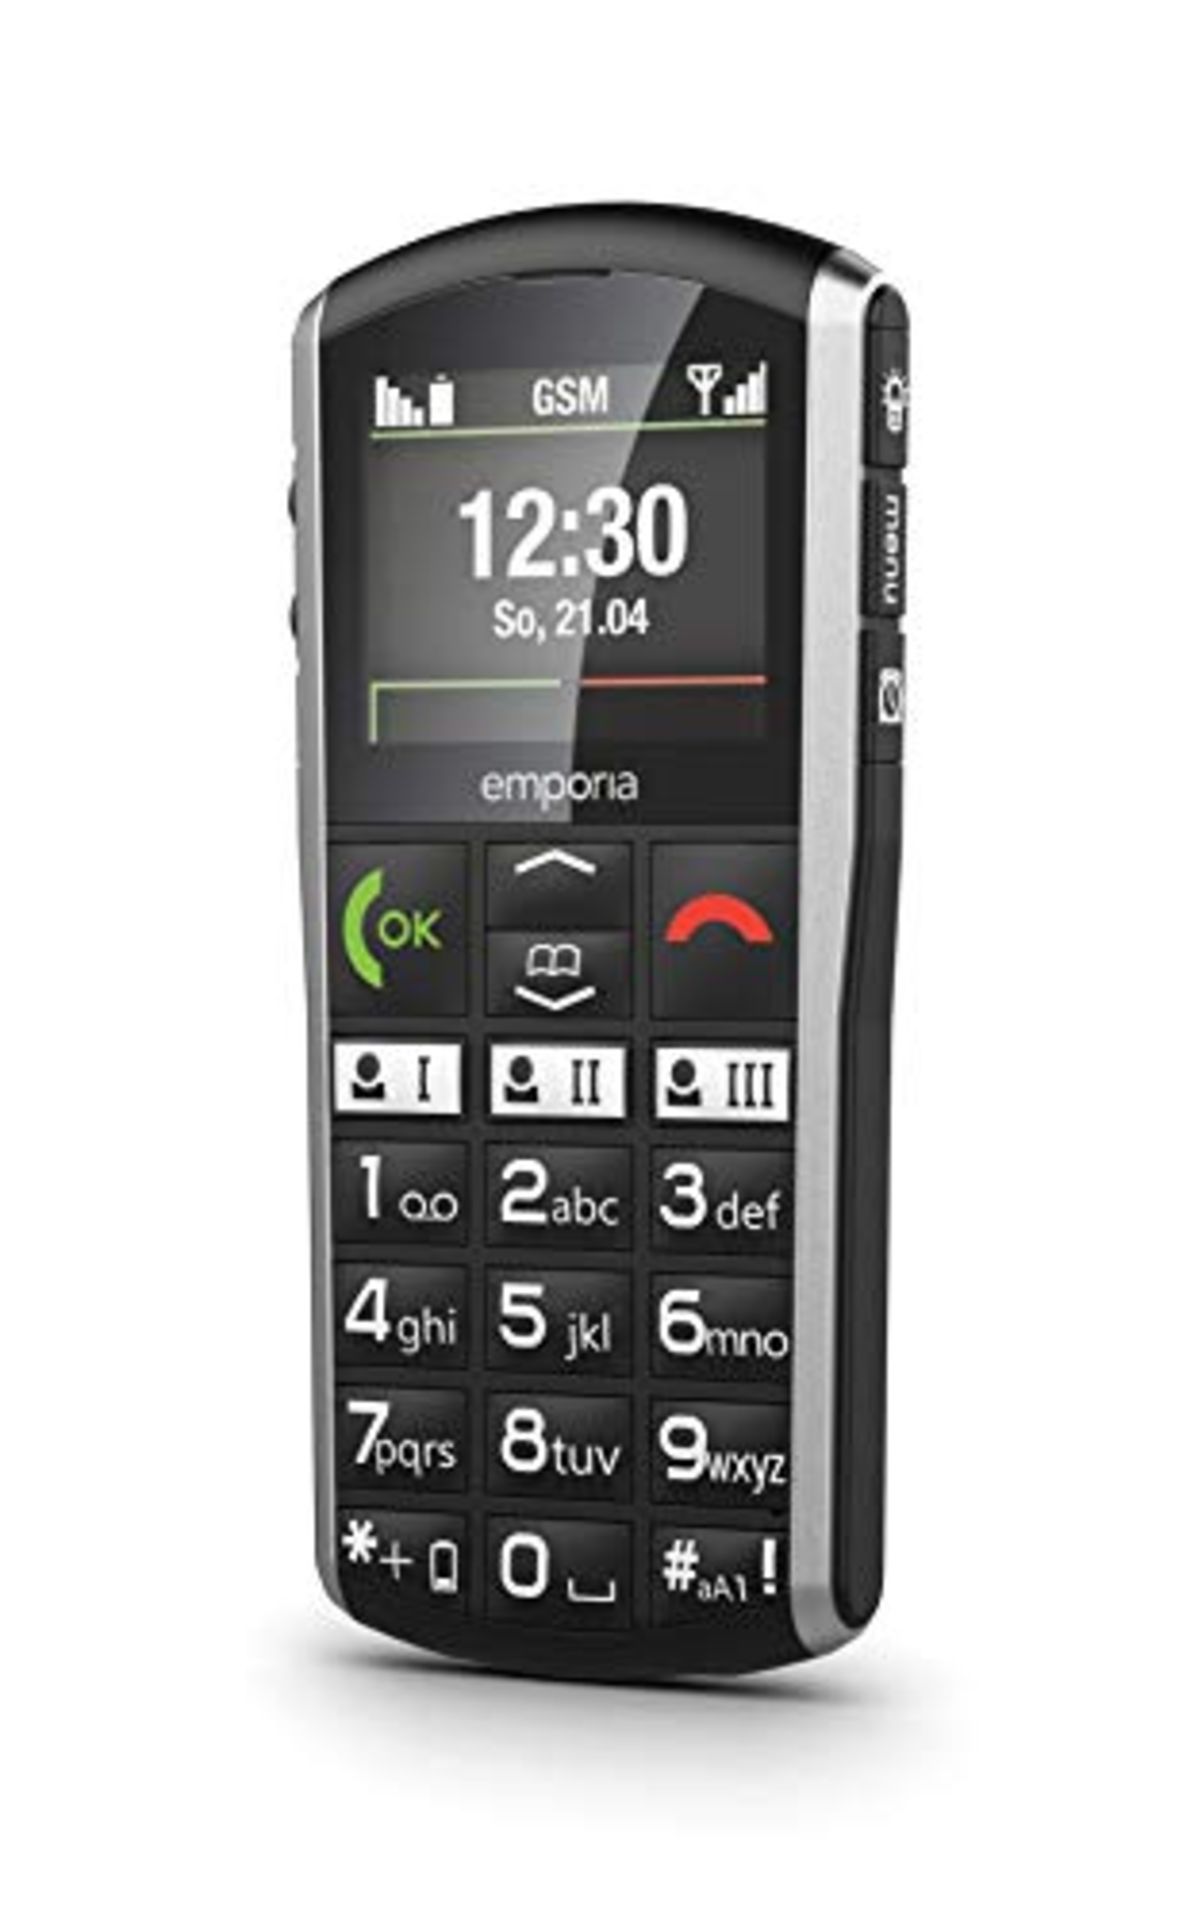 RRP £56.00 emporiaSIMPLICITY | Senior mobile phone | Key mobile phone without contract | Mobile p